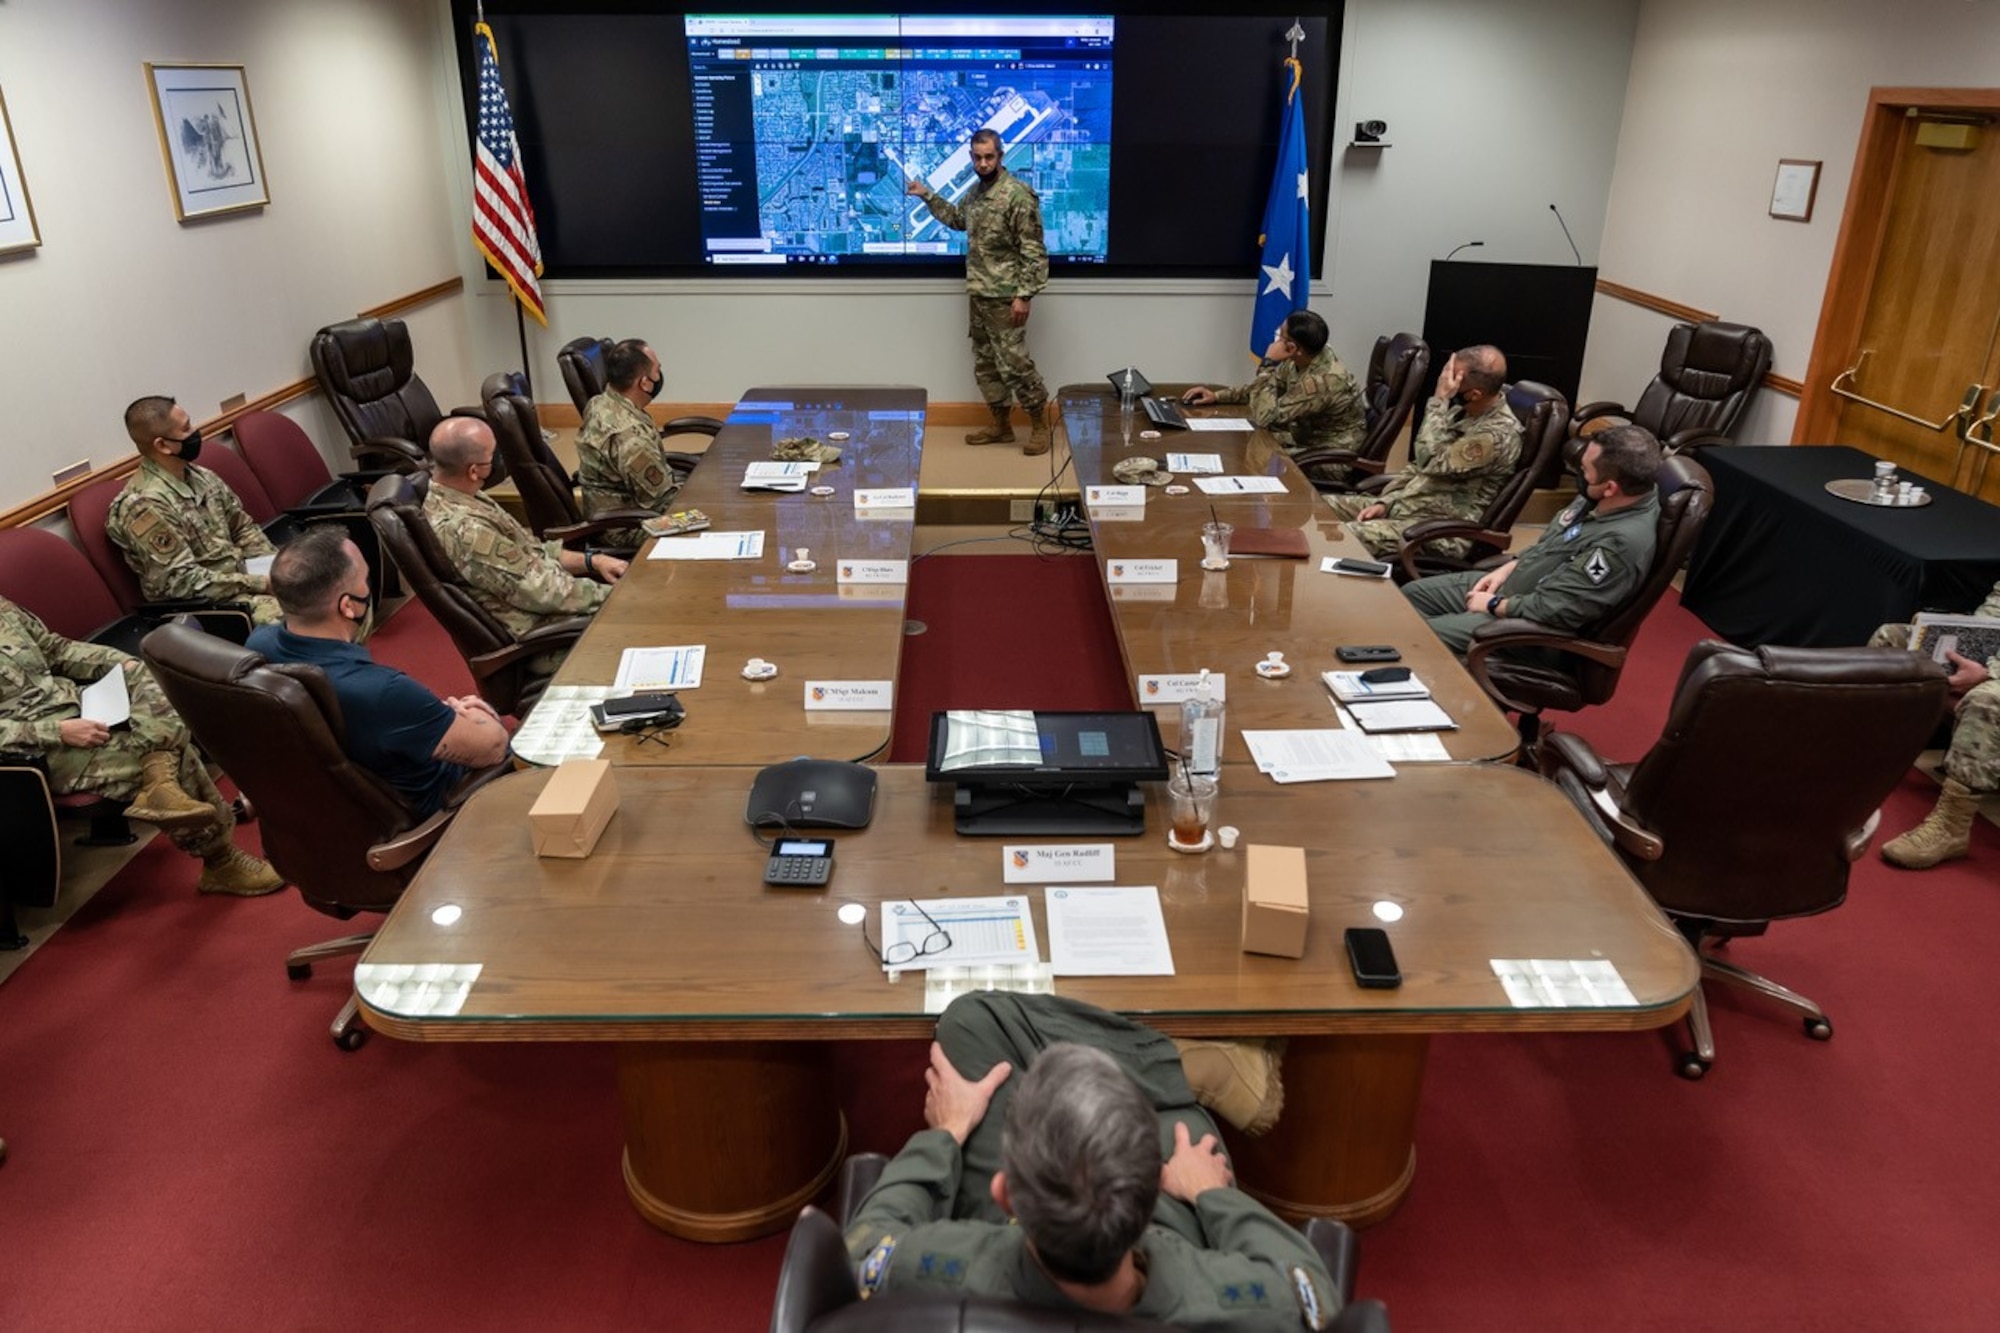 Col. David Castaneda, 482nd FW commander, provides a briefing to Maj. Gen. Bryan Radliff, 10th Air Force commander, and Chief Master Sgt. Jeremy Malcom, 10th Air Force command chief, at Homestead Air Reserve Base, Florida, Feb. 7, 2022. Radliff toured HARB meeting its members. (U.S. Air Force photo by Tech. Sgt. Lionel Castellano)